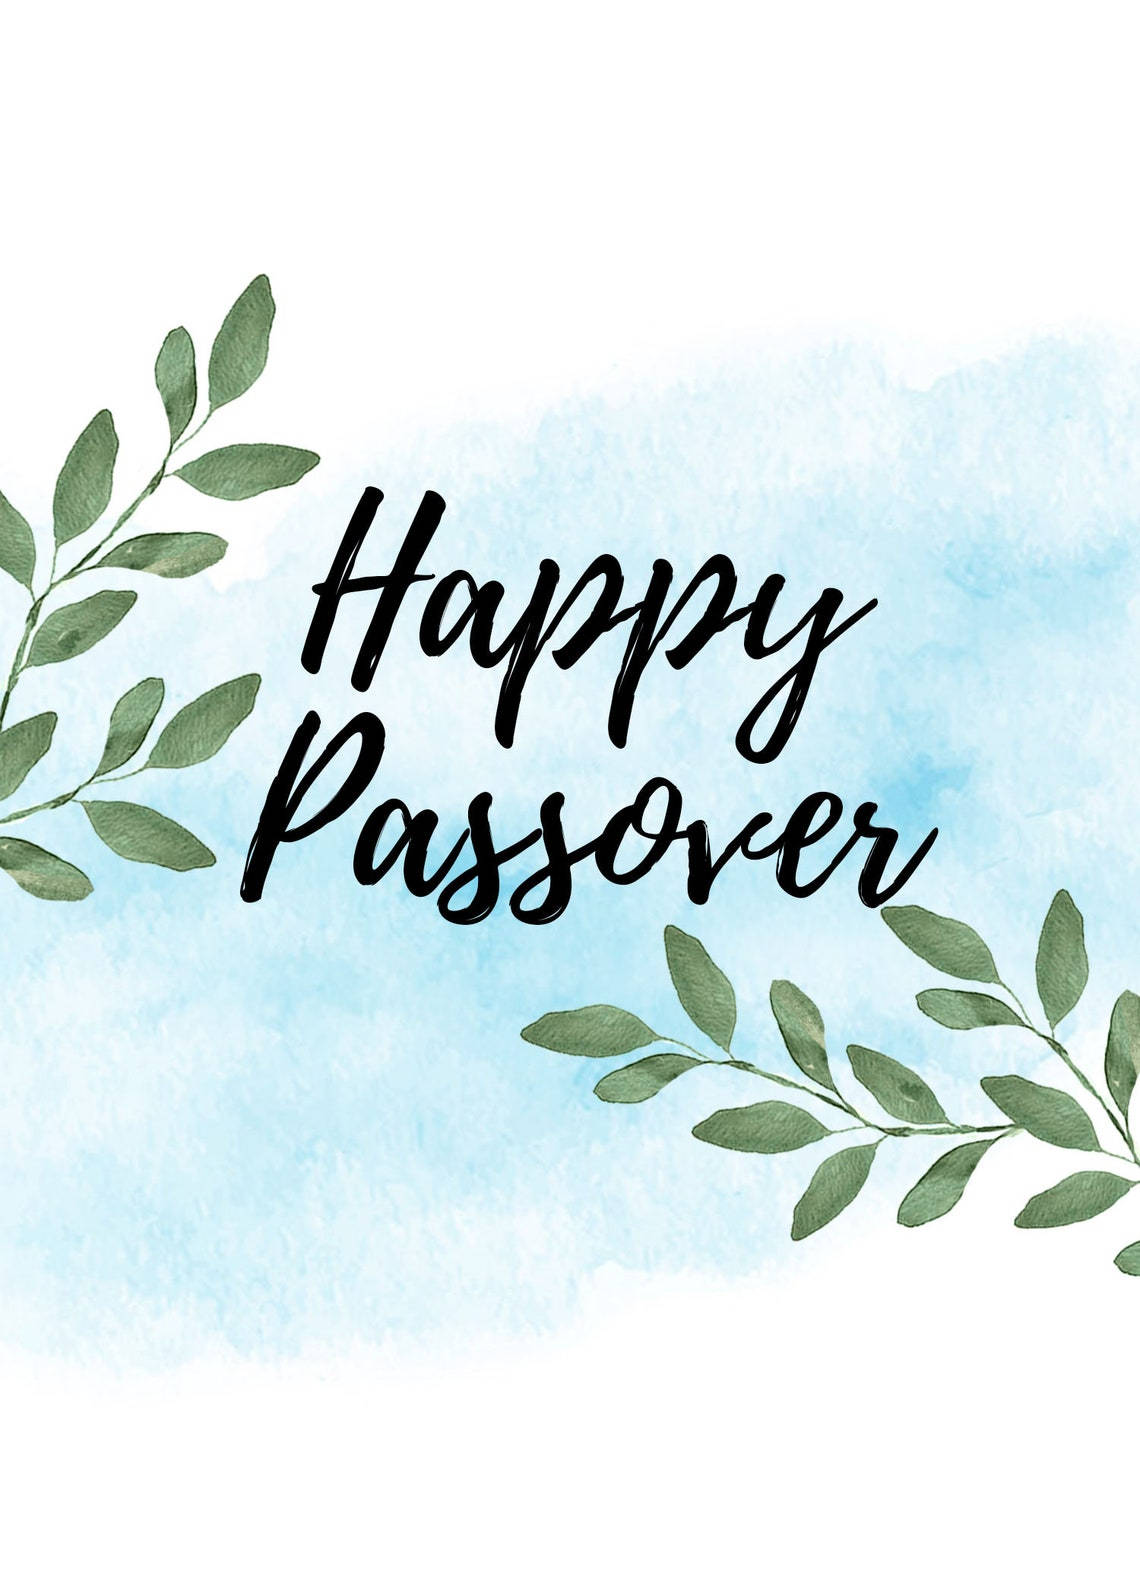 Passover Calligraphy Art Background